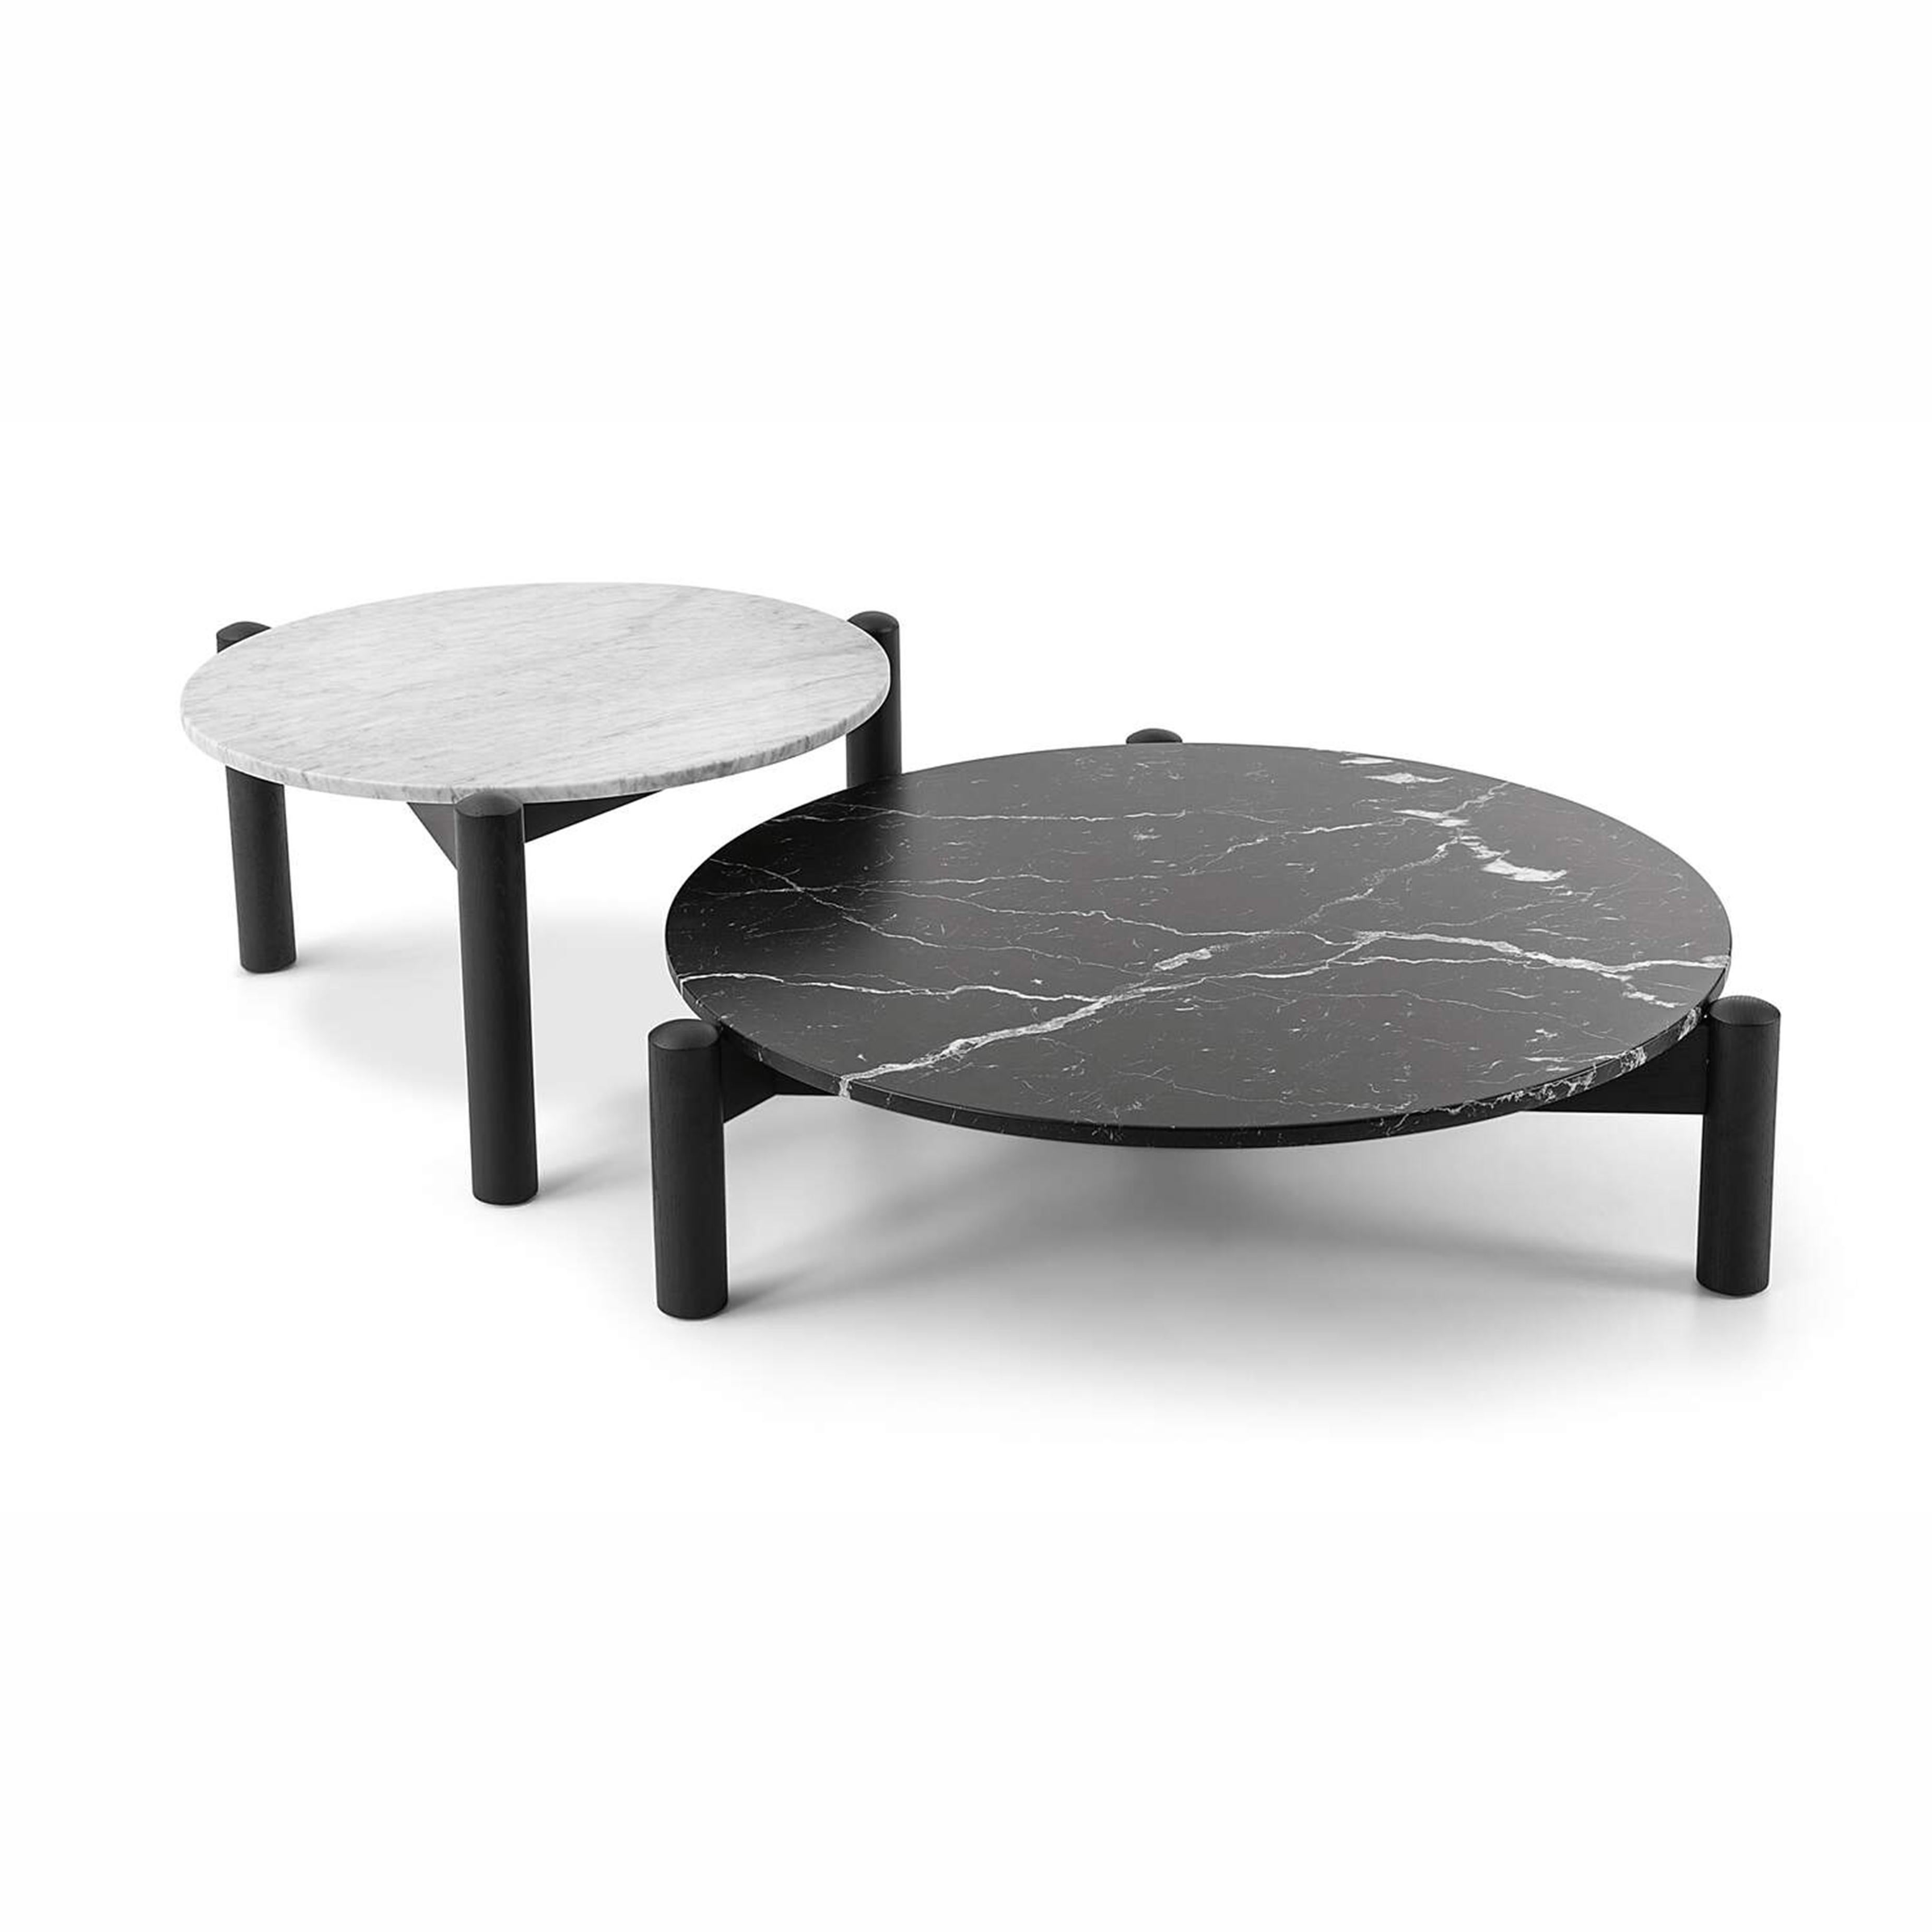 Contemporary Mid Century Modern Table Black Wood and Marble by Charlotte Perriand for Cassina For Sale